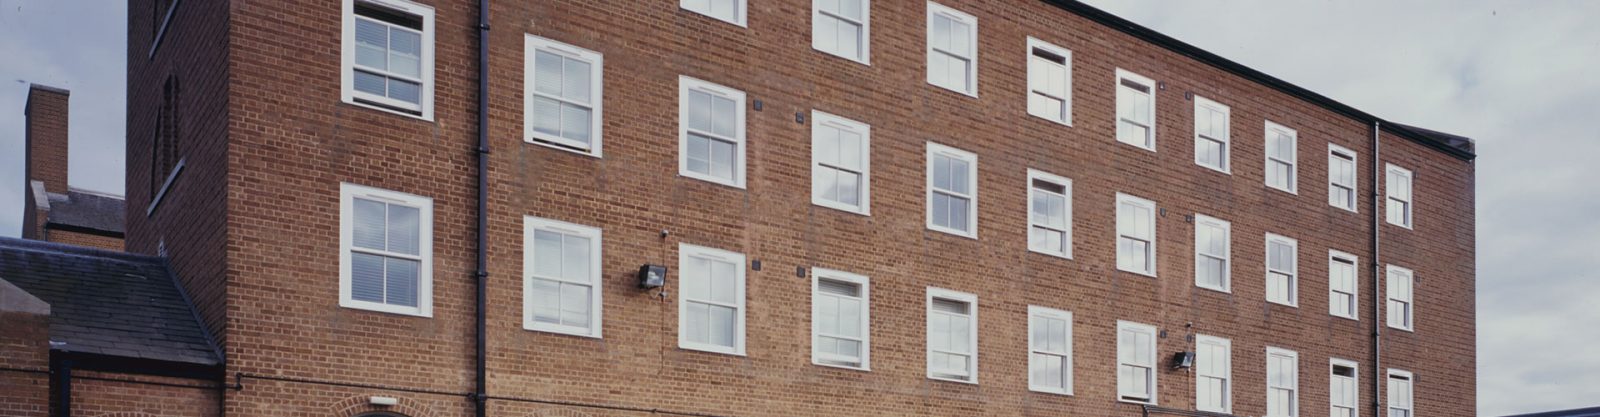 Sash Windows for Commercial Applications